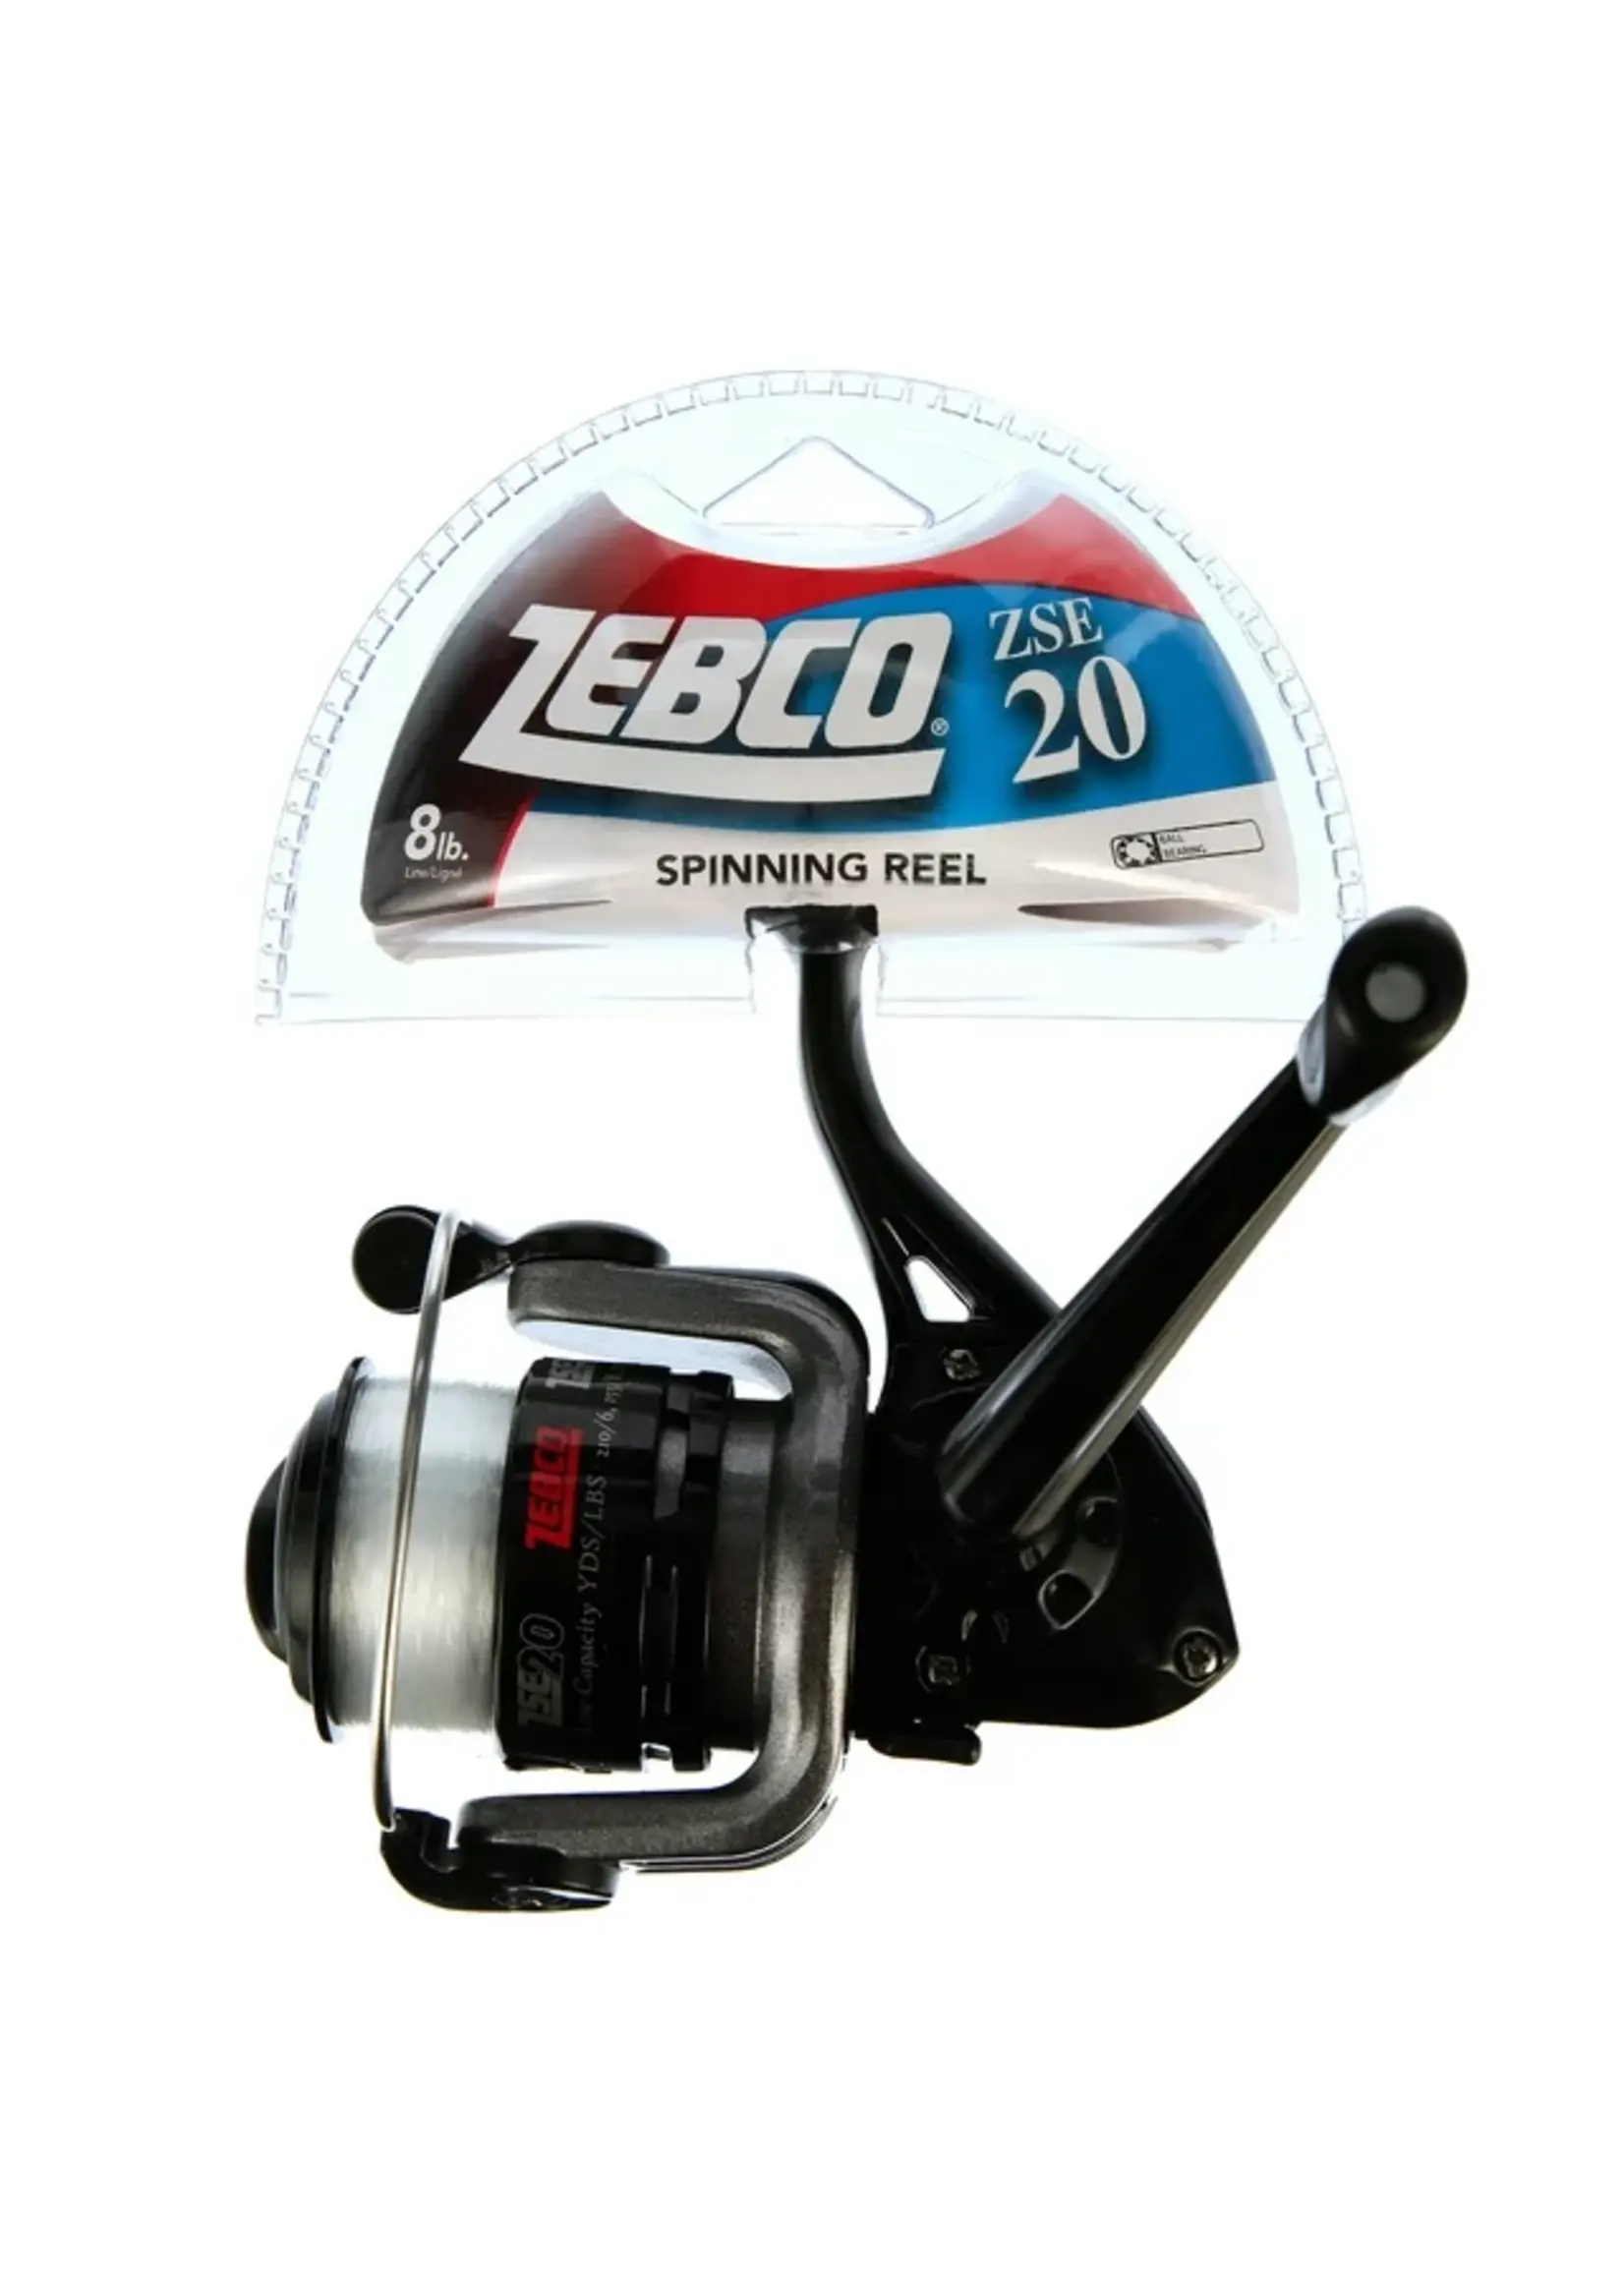 Zebco Zebco Spinning Reel ZSE 20 8lb